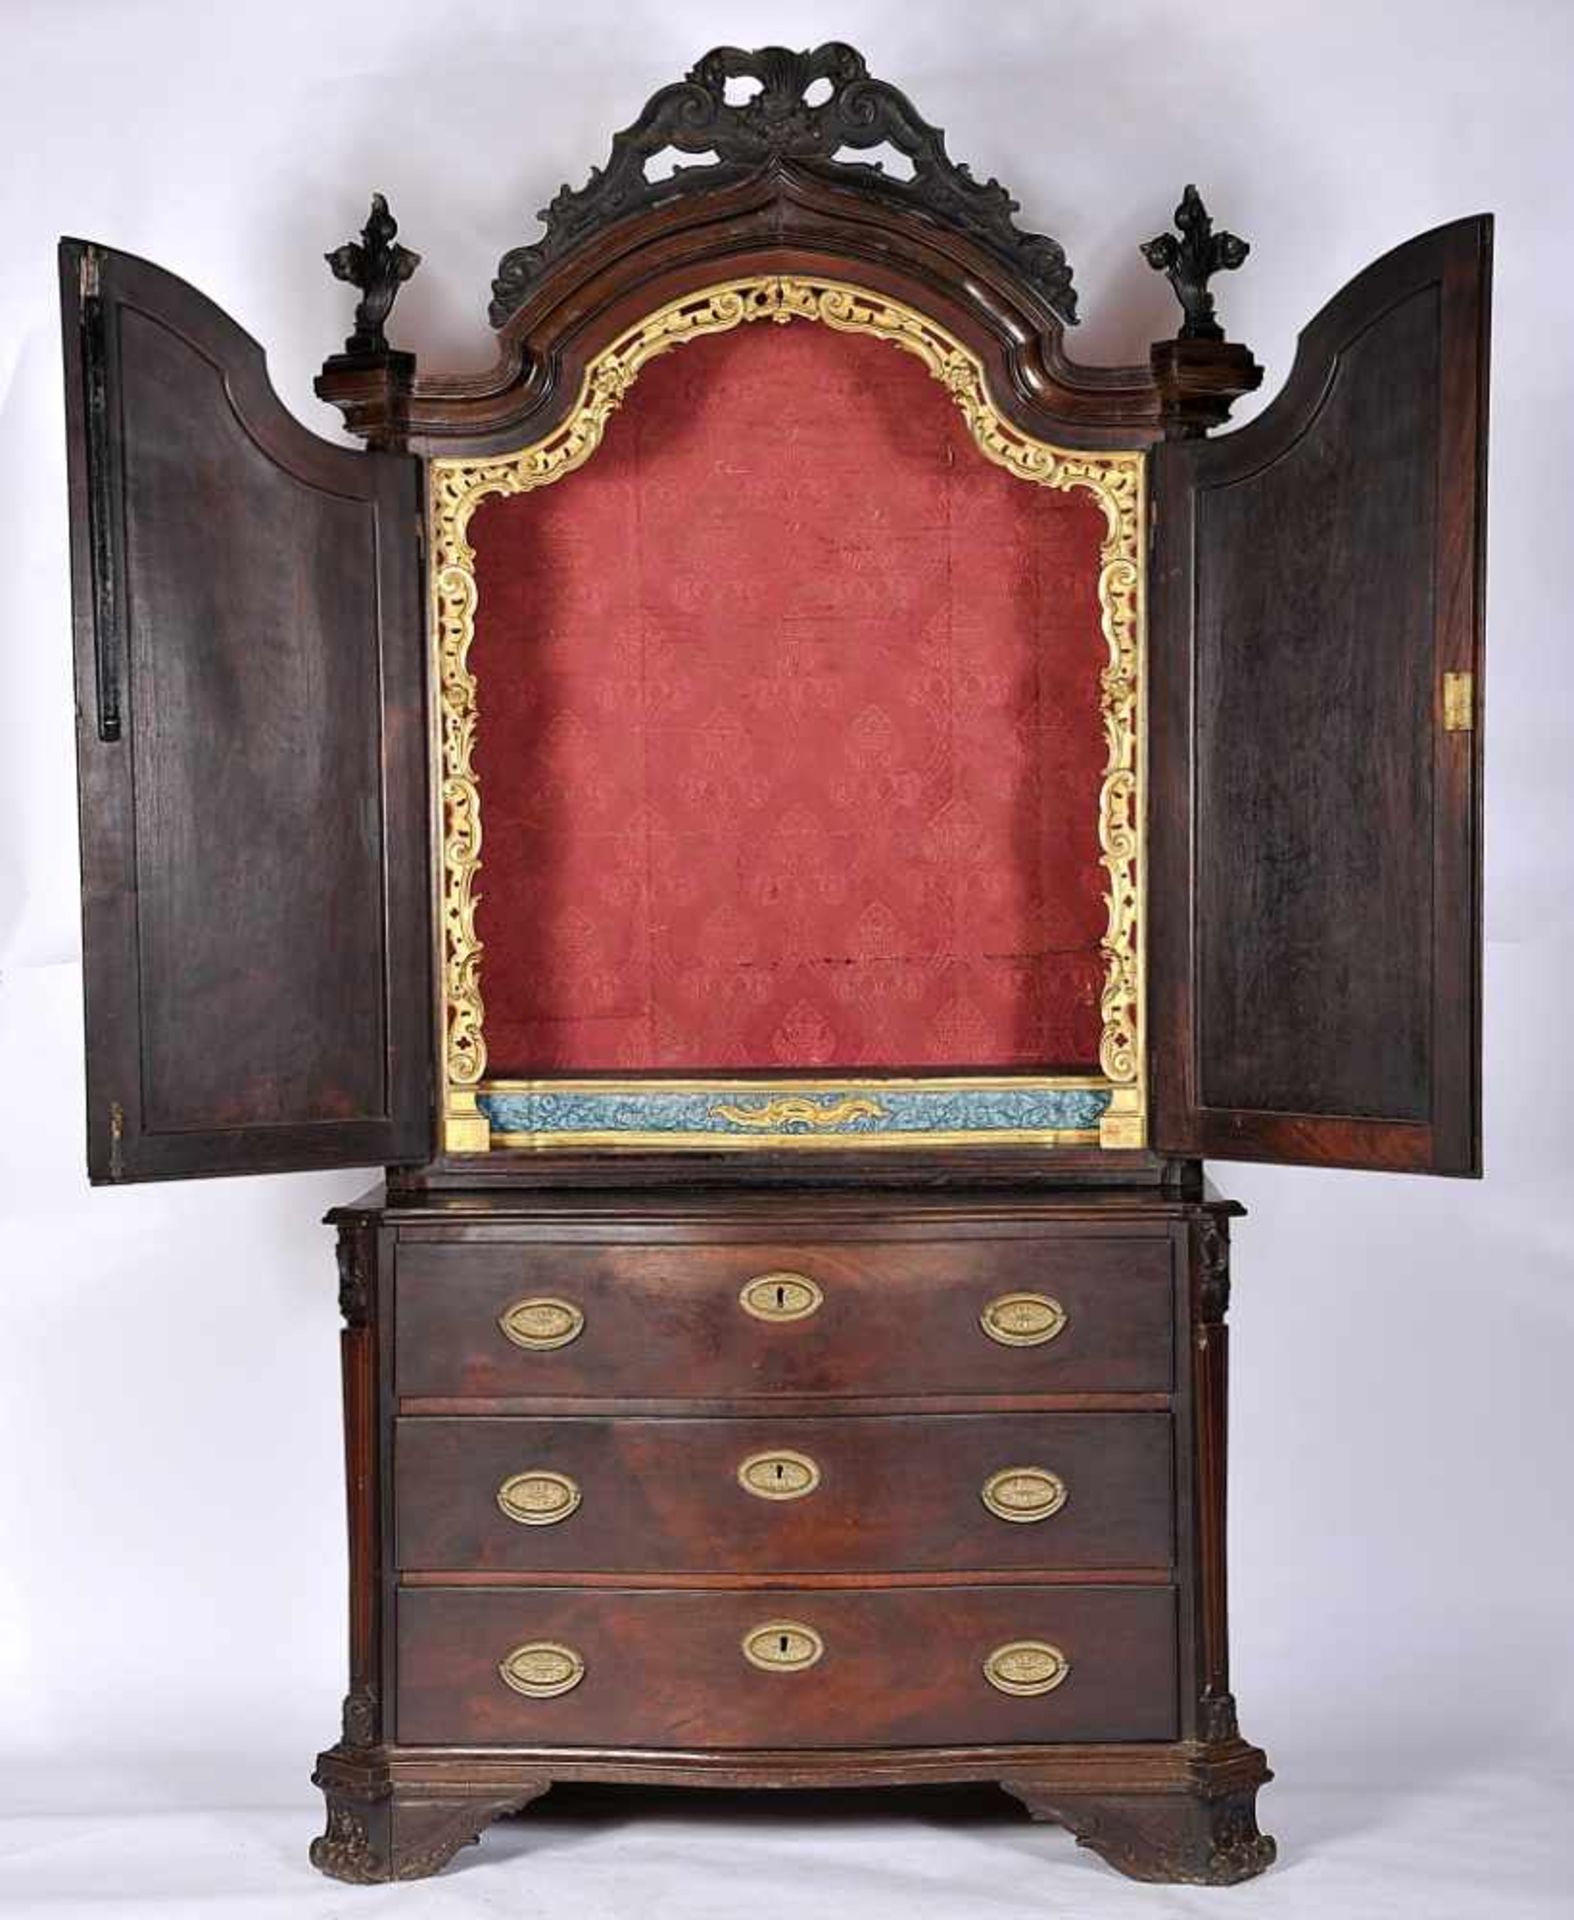 A Chest of Drawers with OratoryA Chest of Drawers with Oratory, D. José I, King of Portugal (1750-